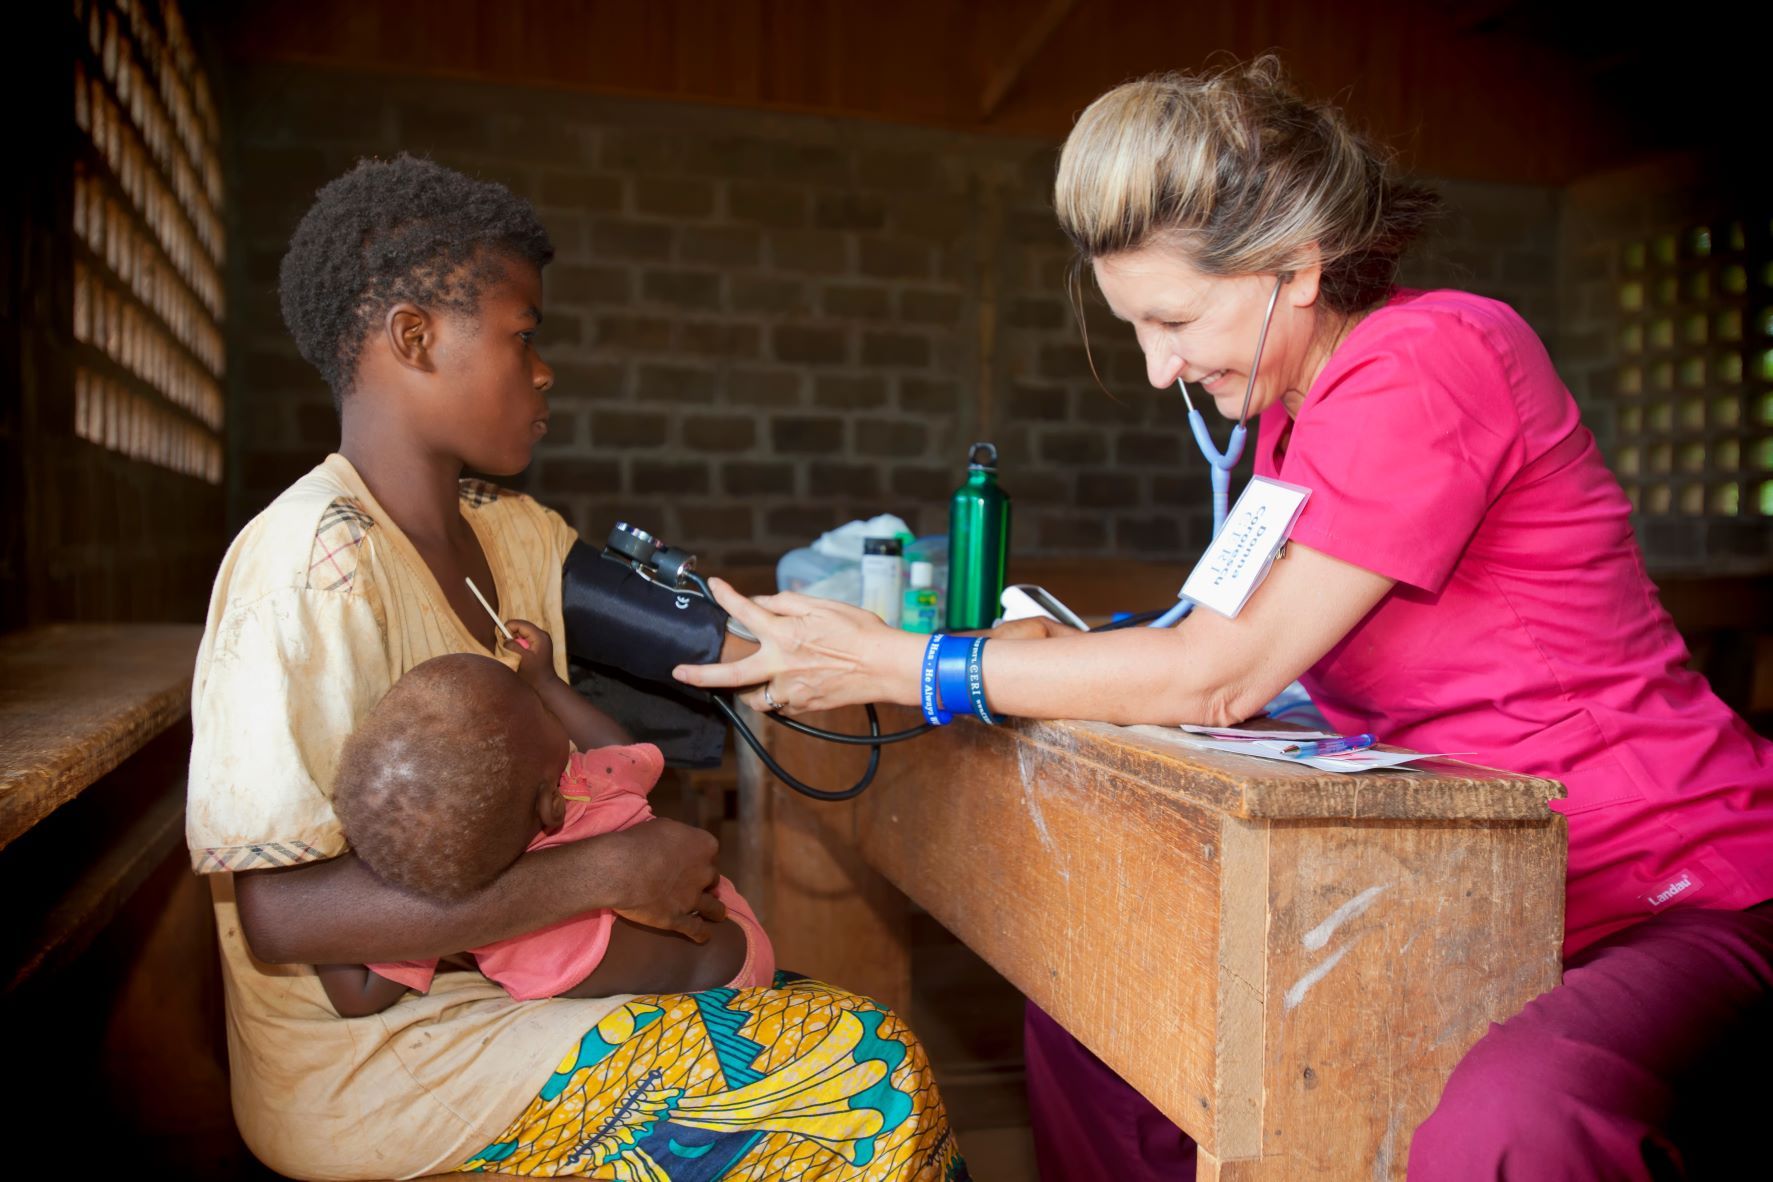 Donna volunteering on a medical mission trip in Central Africa Republic (2012).